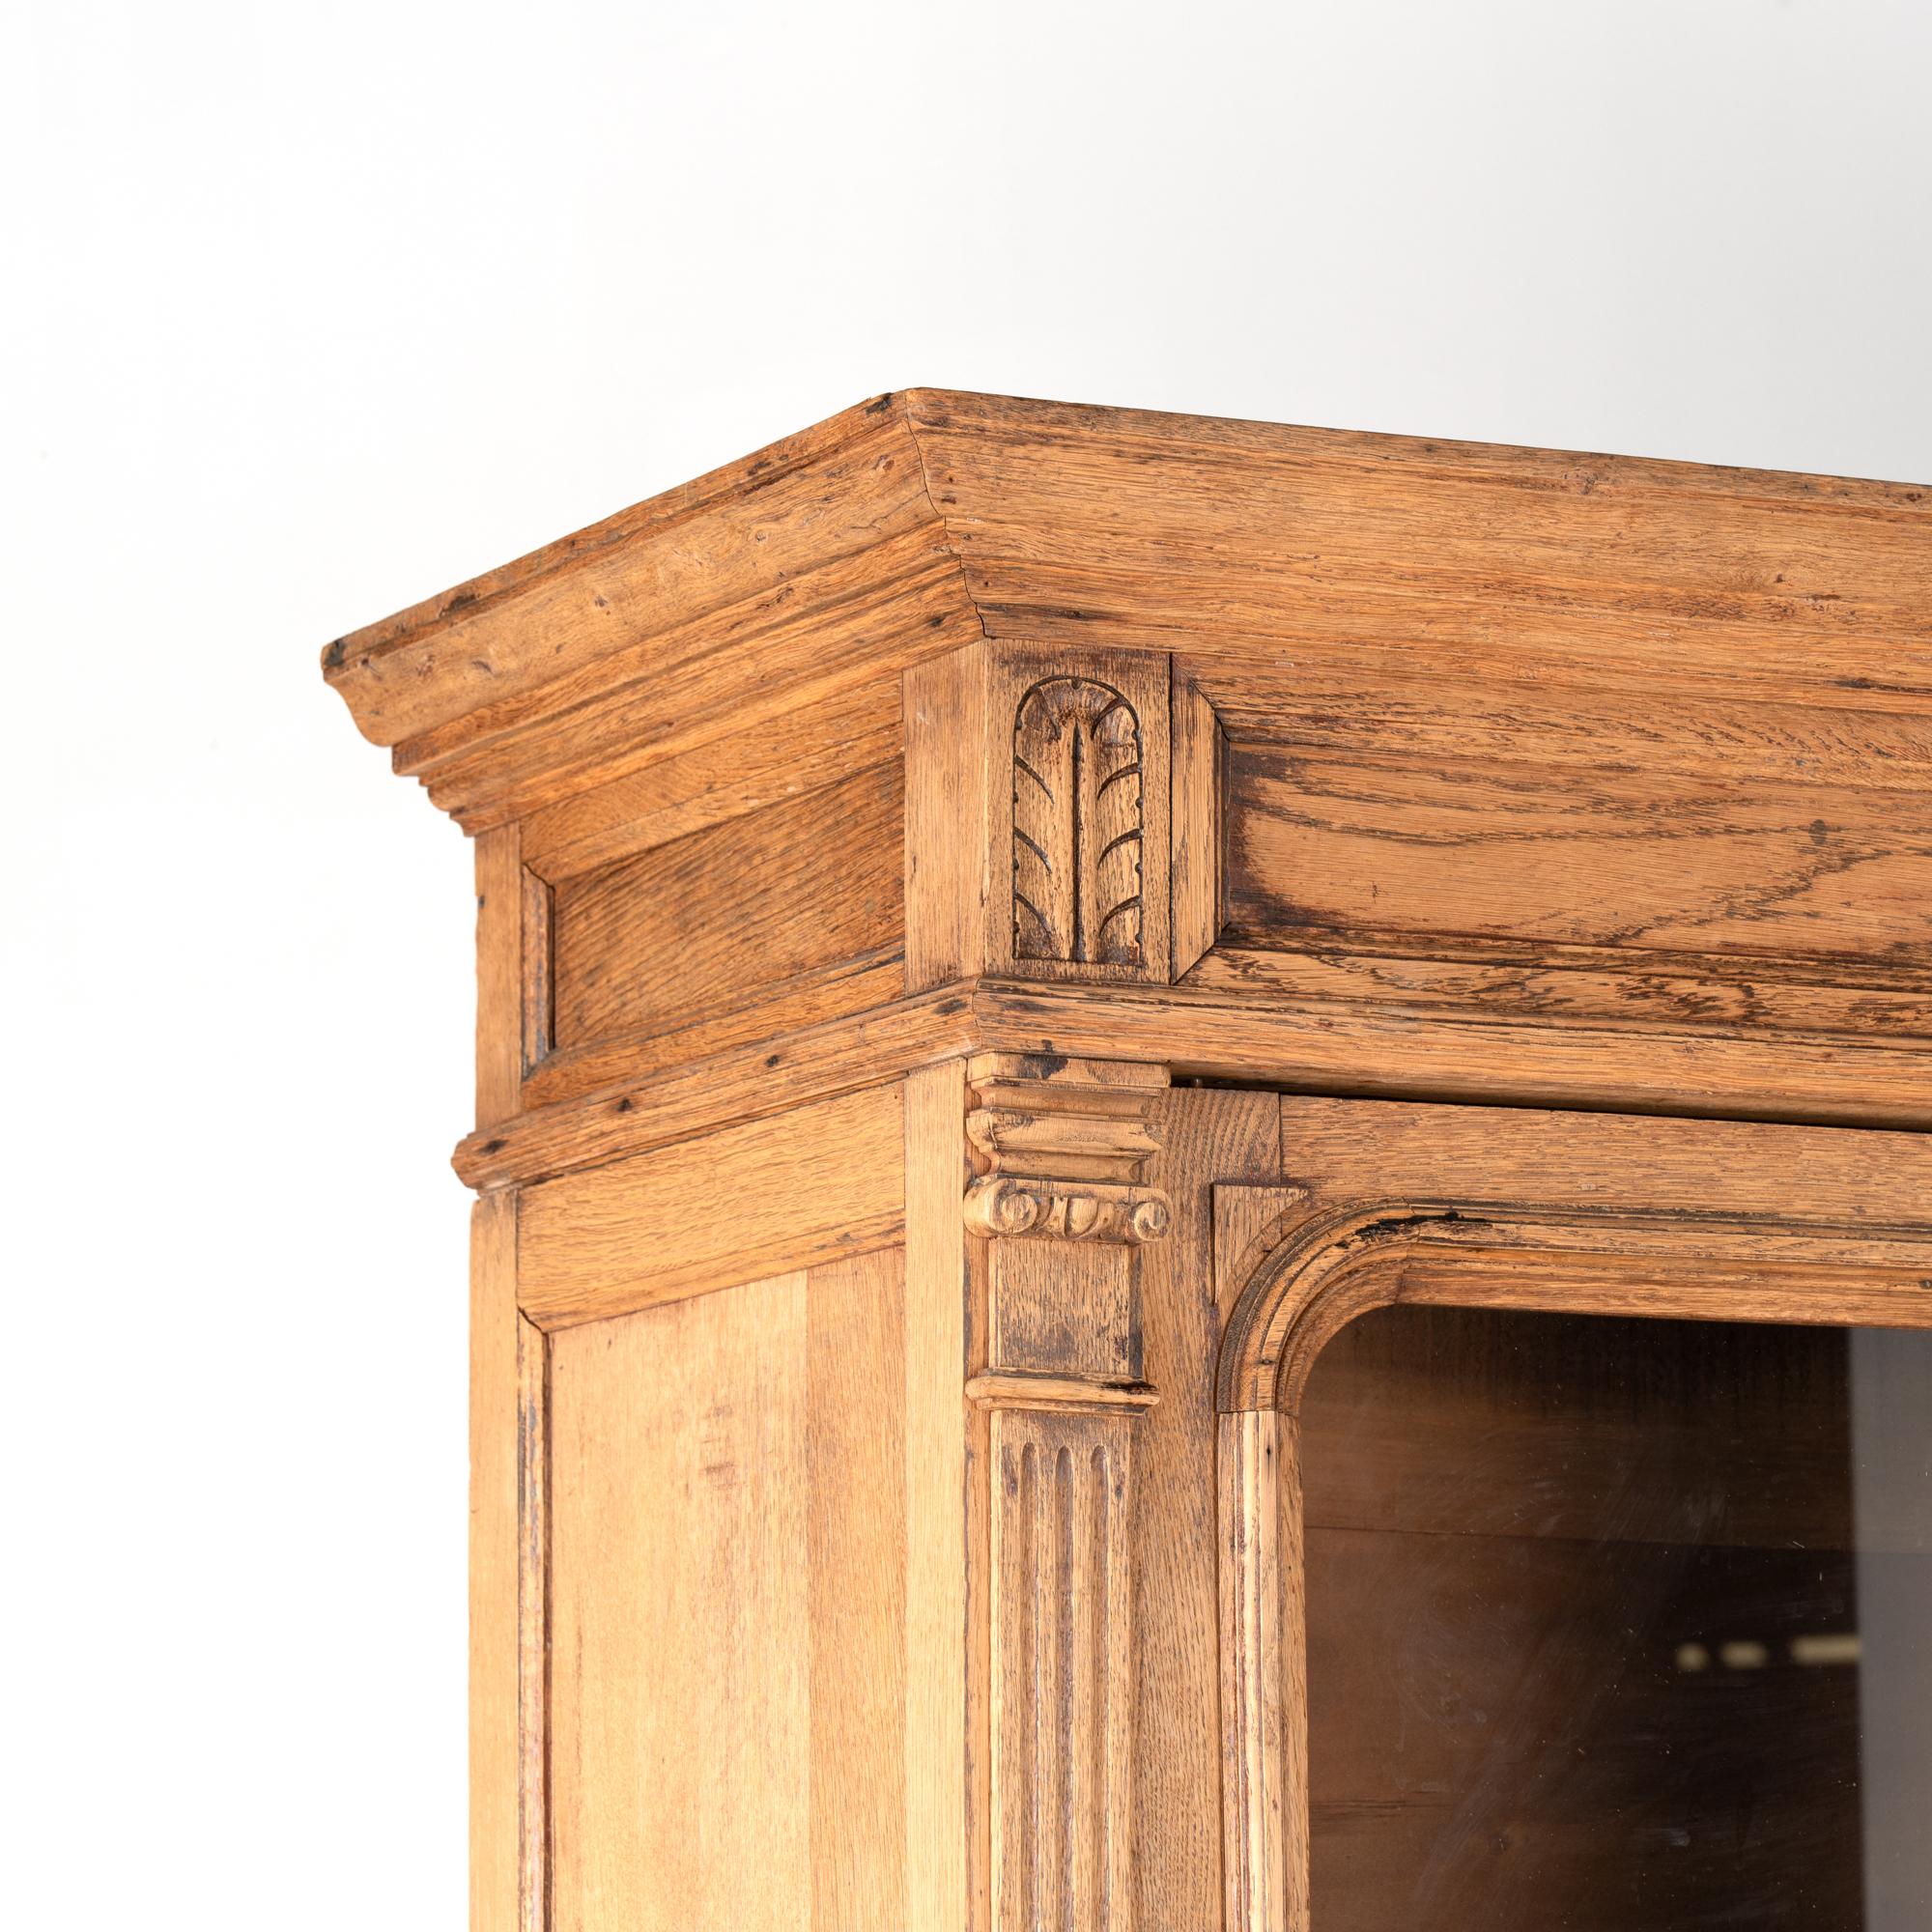 20th Century Bleached Oak Display Cabinet Bookcase With Adjustable Shelves France circa 1900s